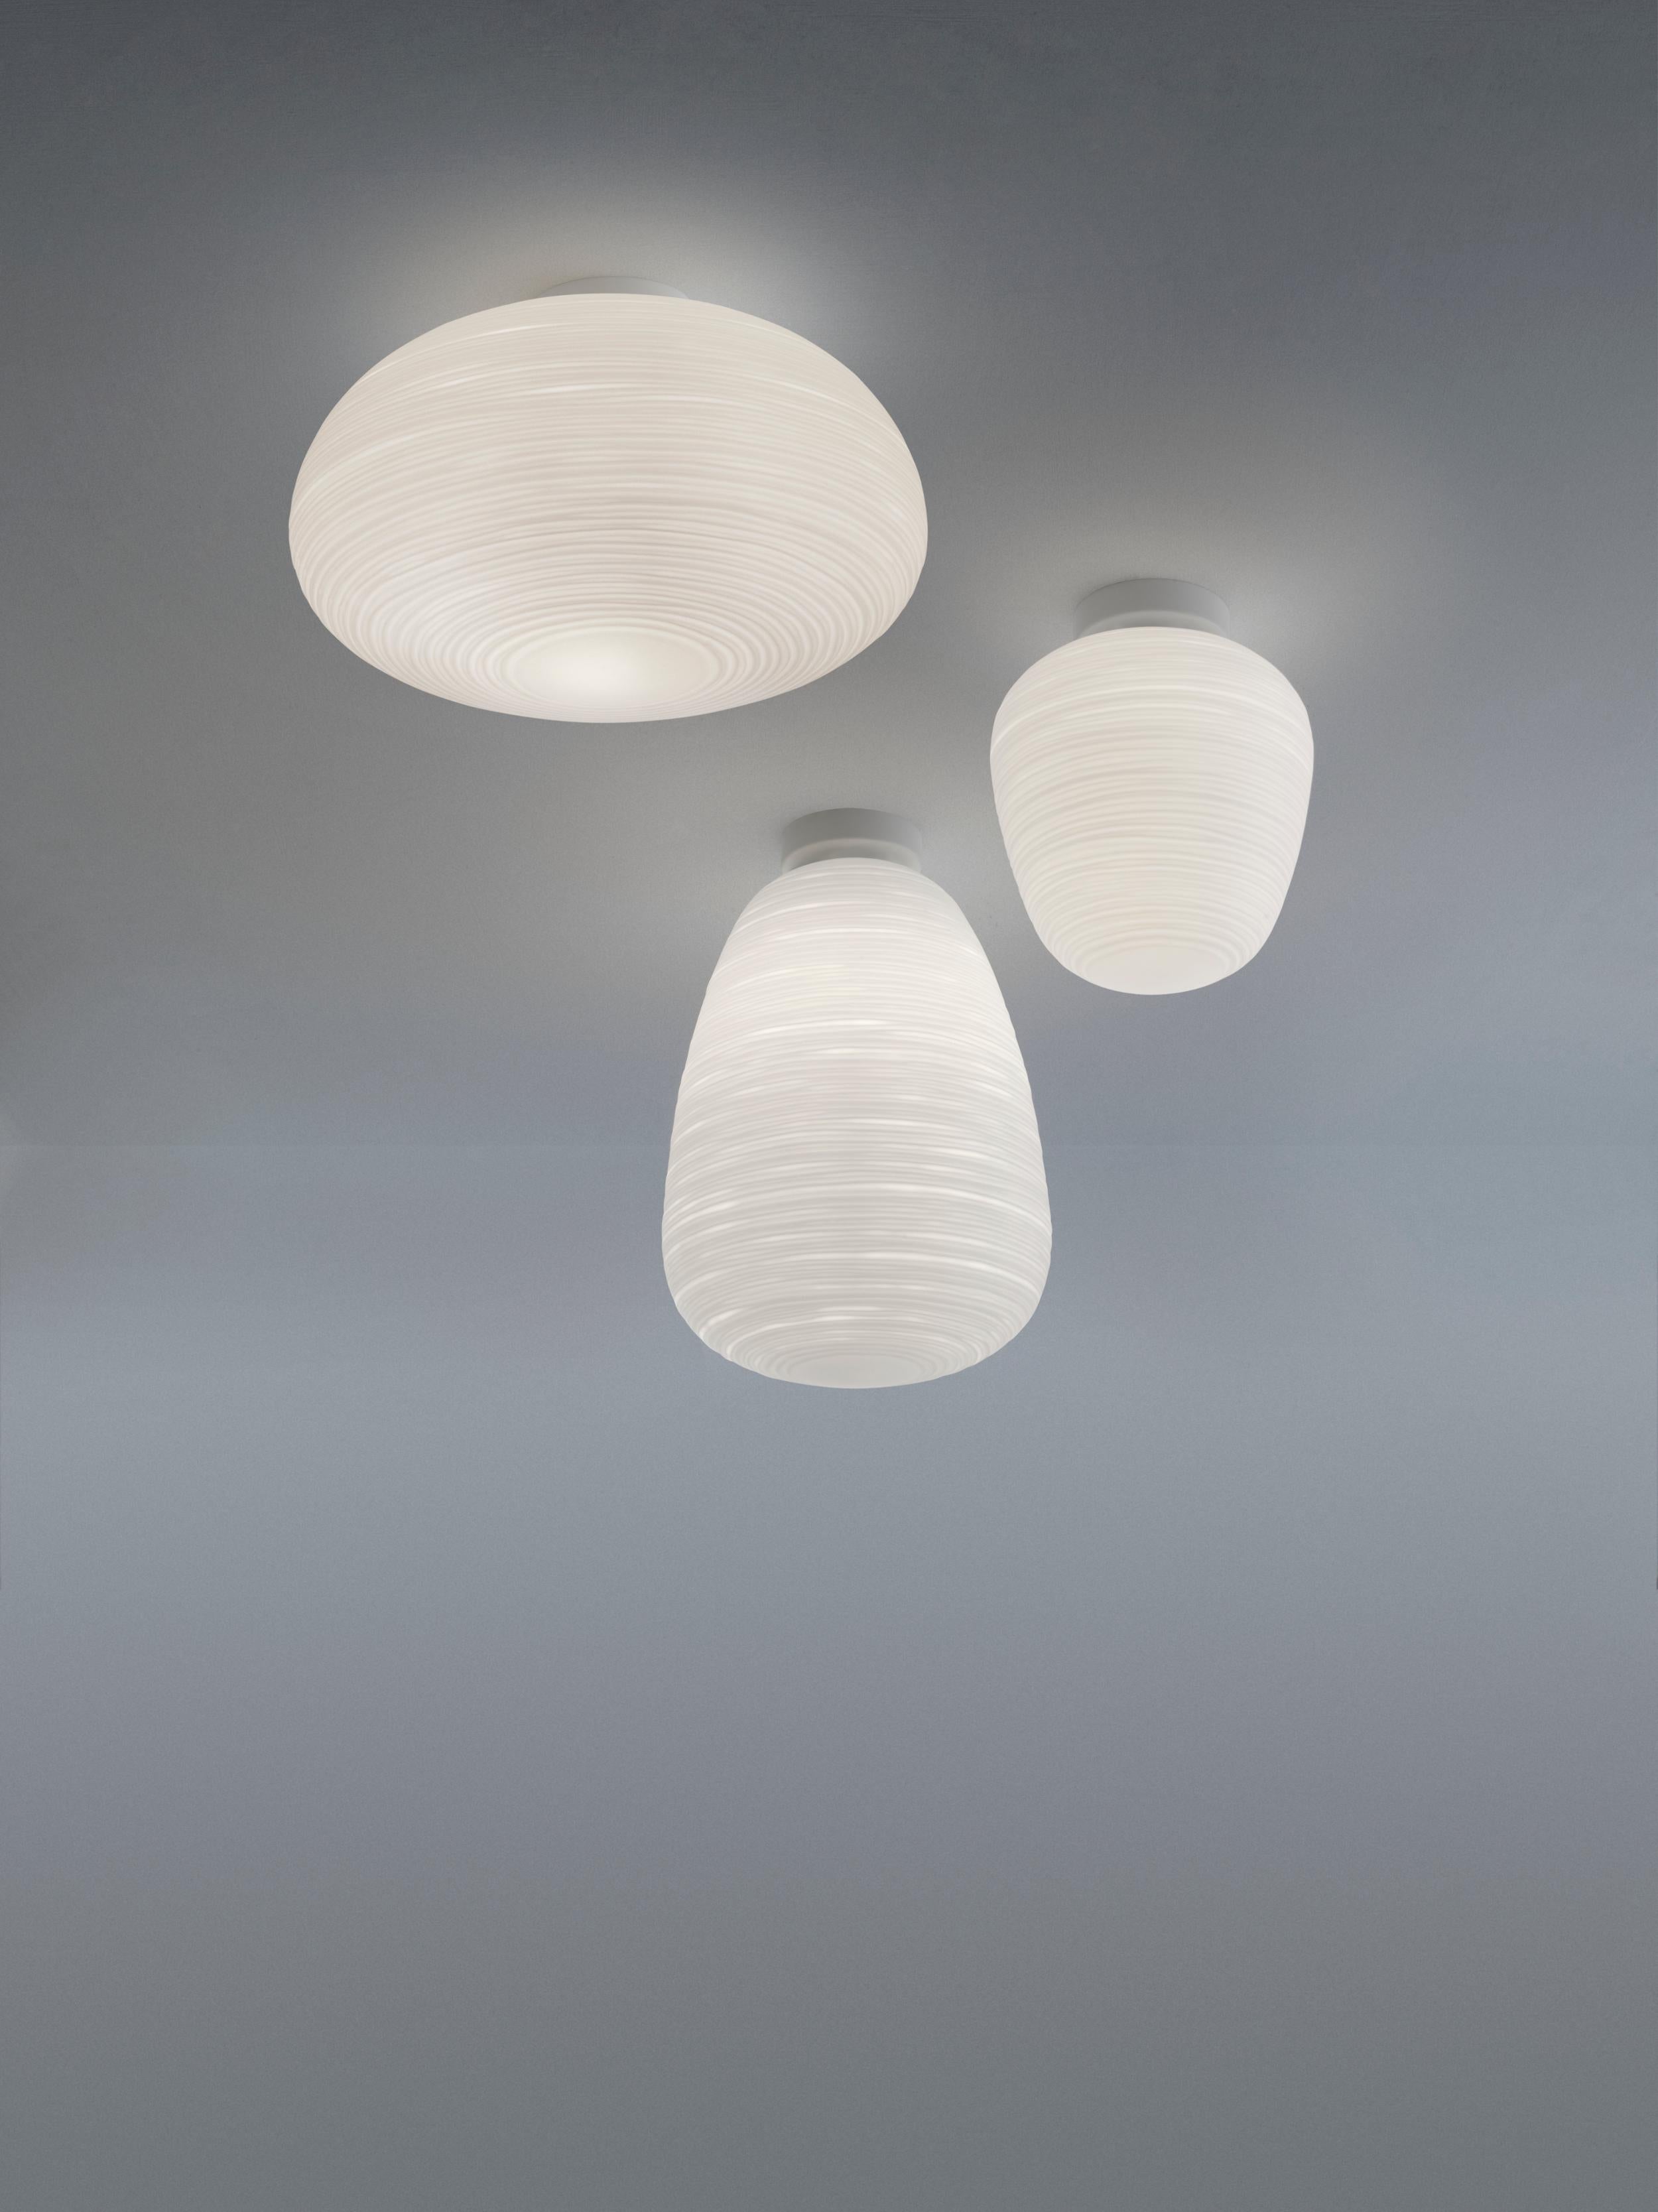 The Rituals ceiling lamps translate the luminous magic of Oriental rice paper lanterns into items of contemporary design, made of blown glass with a special processing on the surface. The compact shape and cosy glow of the Rituals 3 ceiling lamp